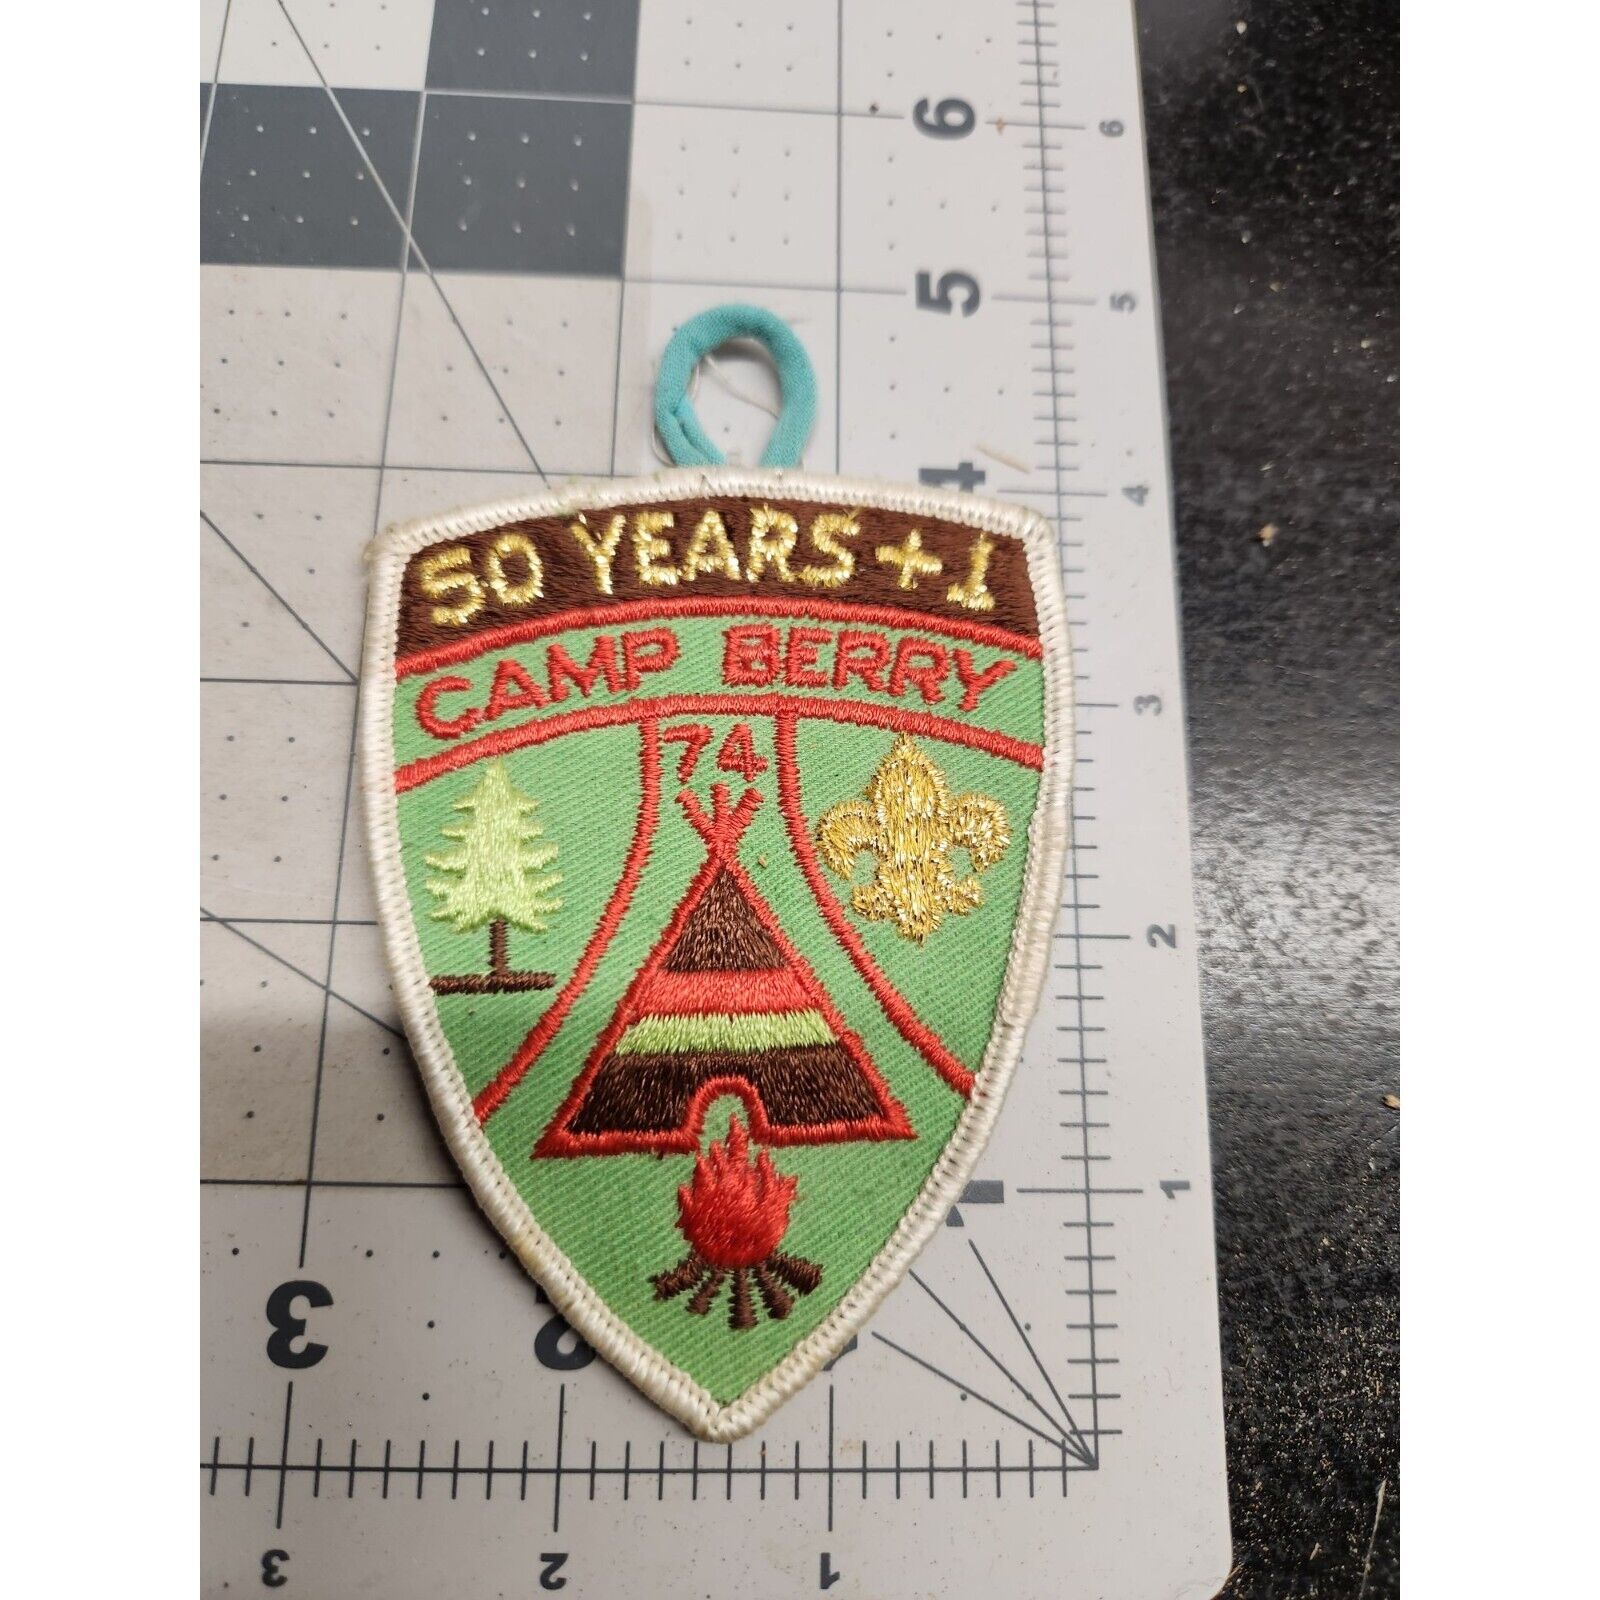 1974 Camp Berry 50 Years + 1 Boy Scouts of America Patch with strap